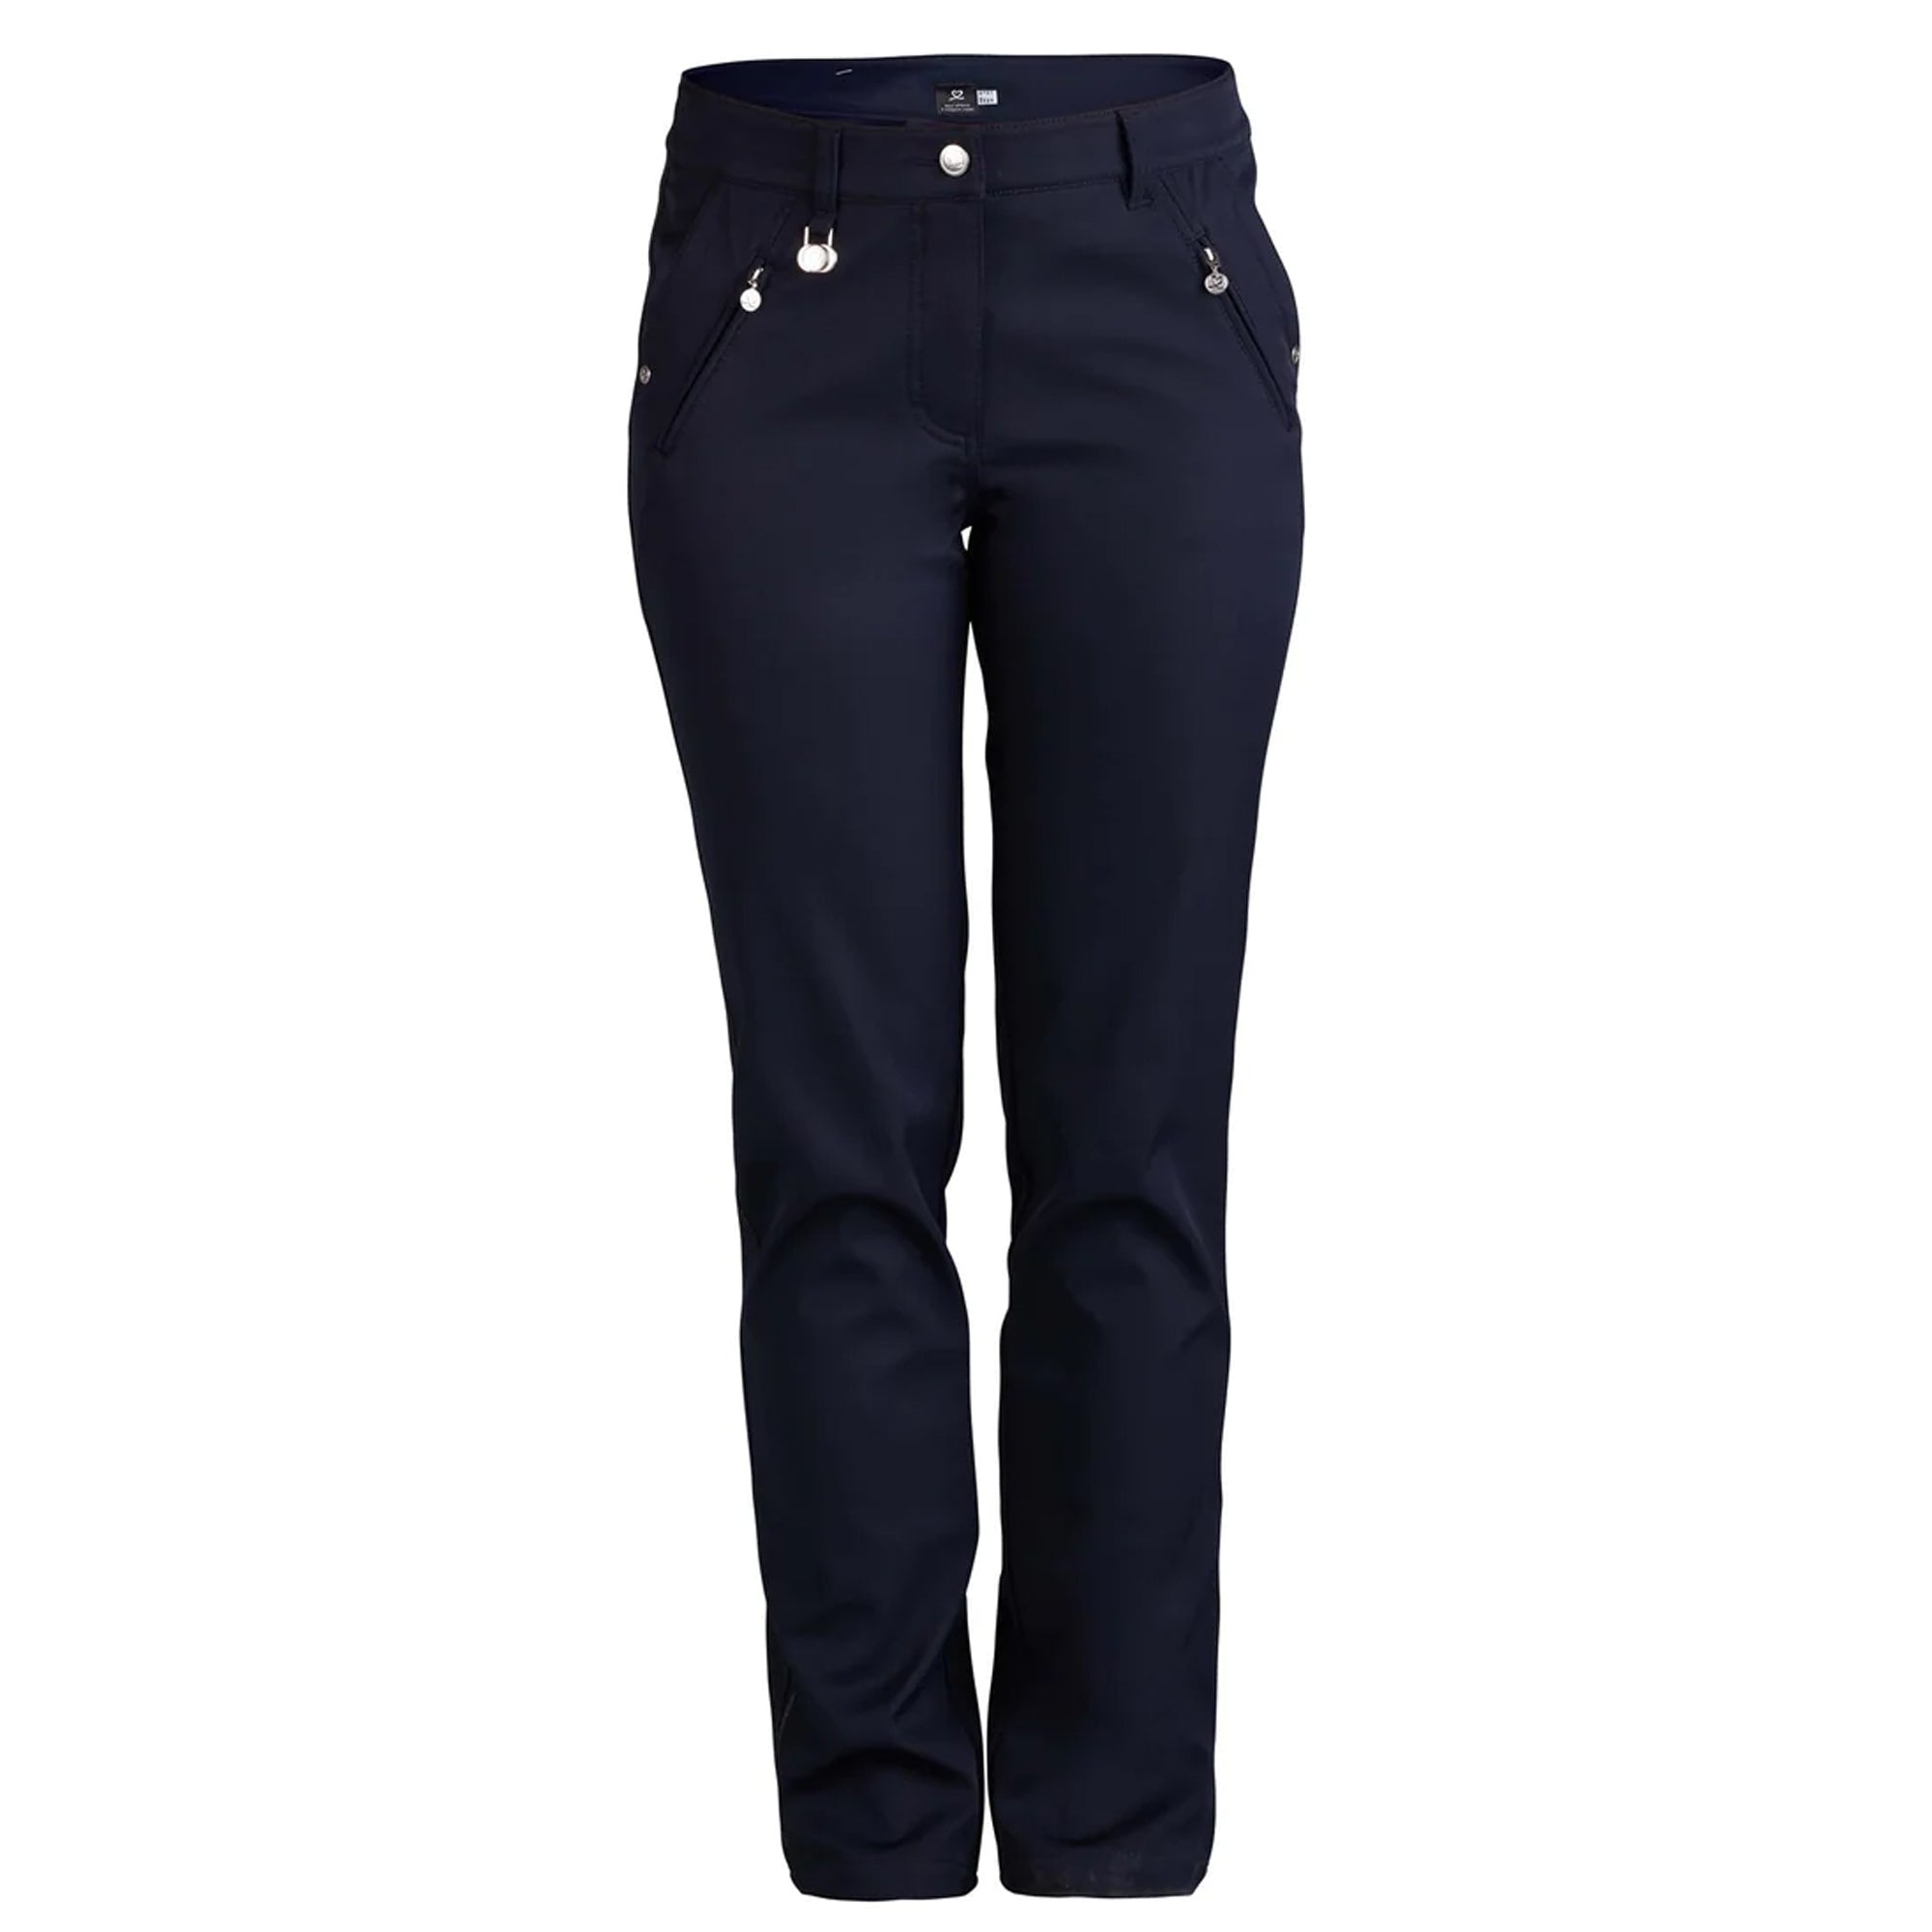 Daily Sports Irene Lined Golf Trouser Navy 29 Inch Leg